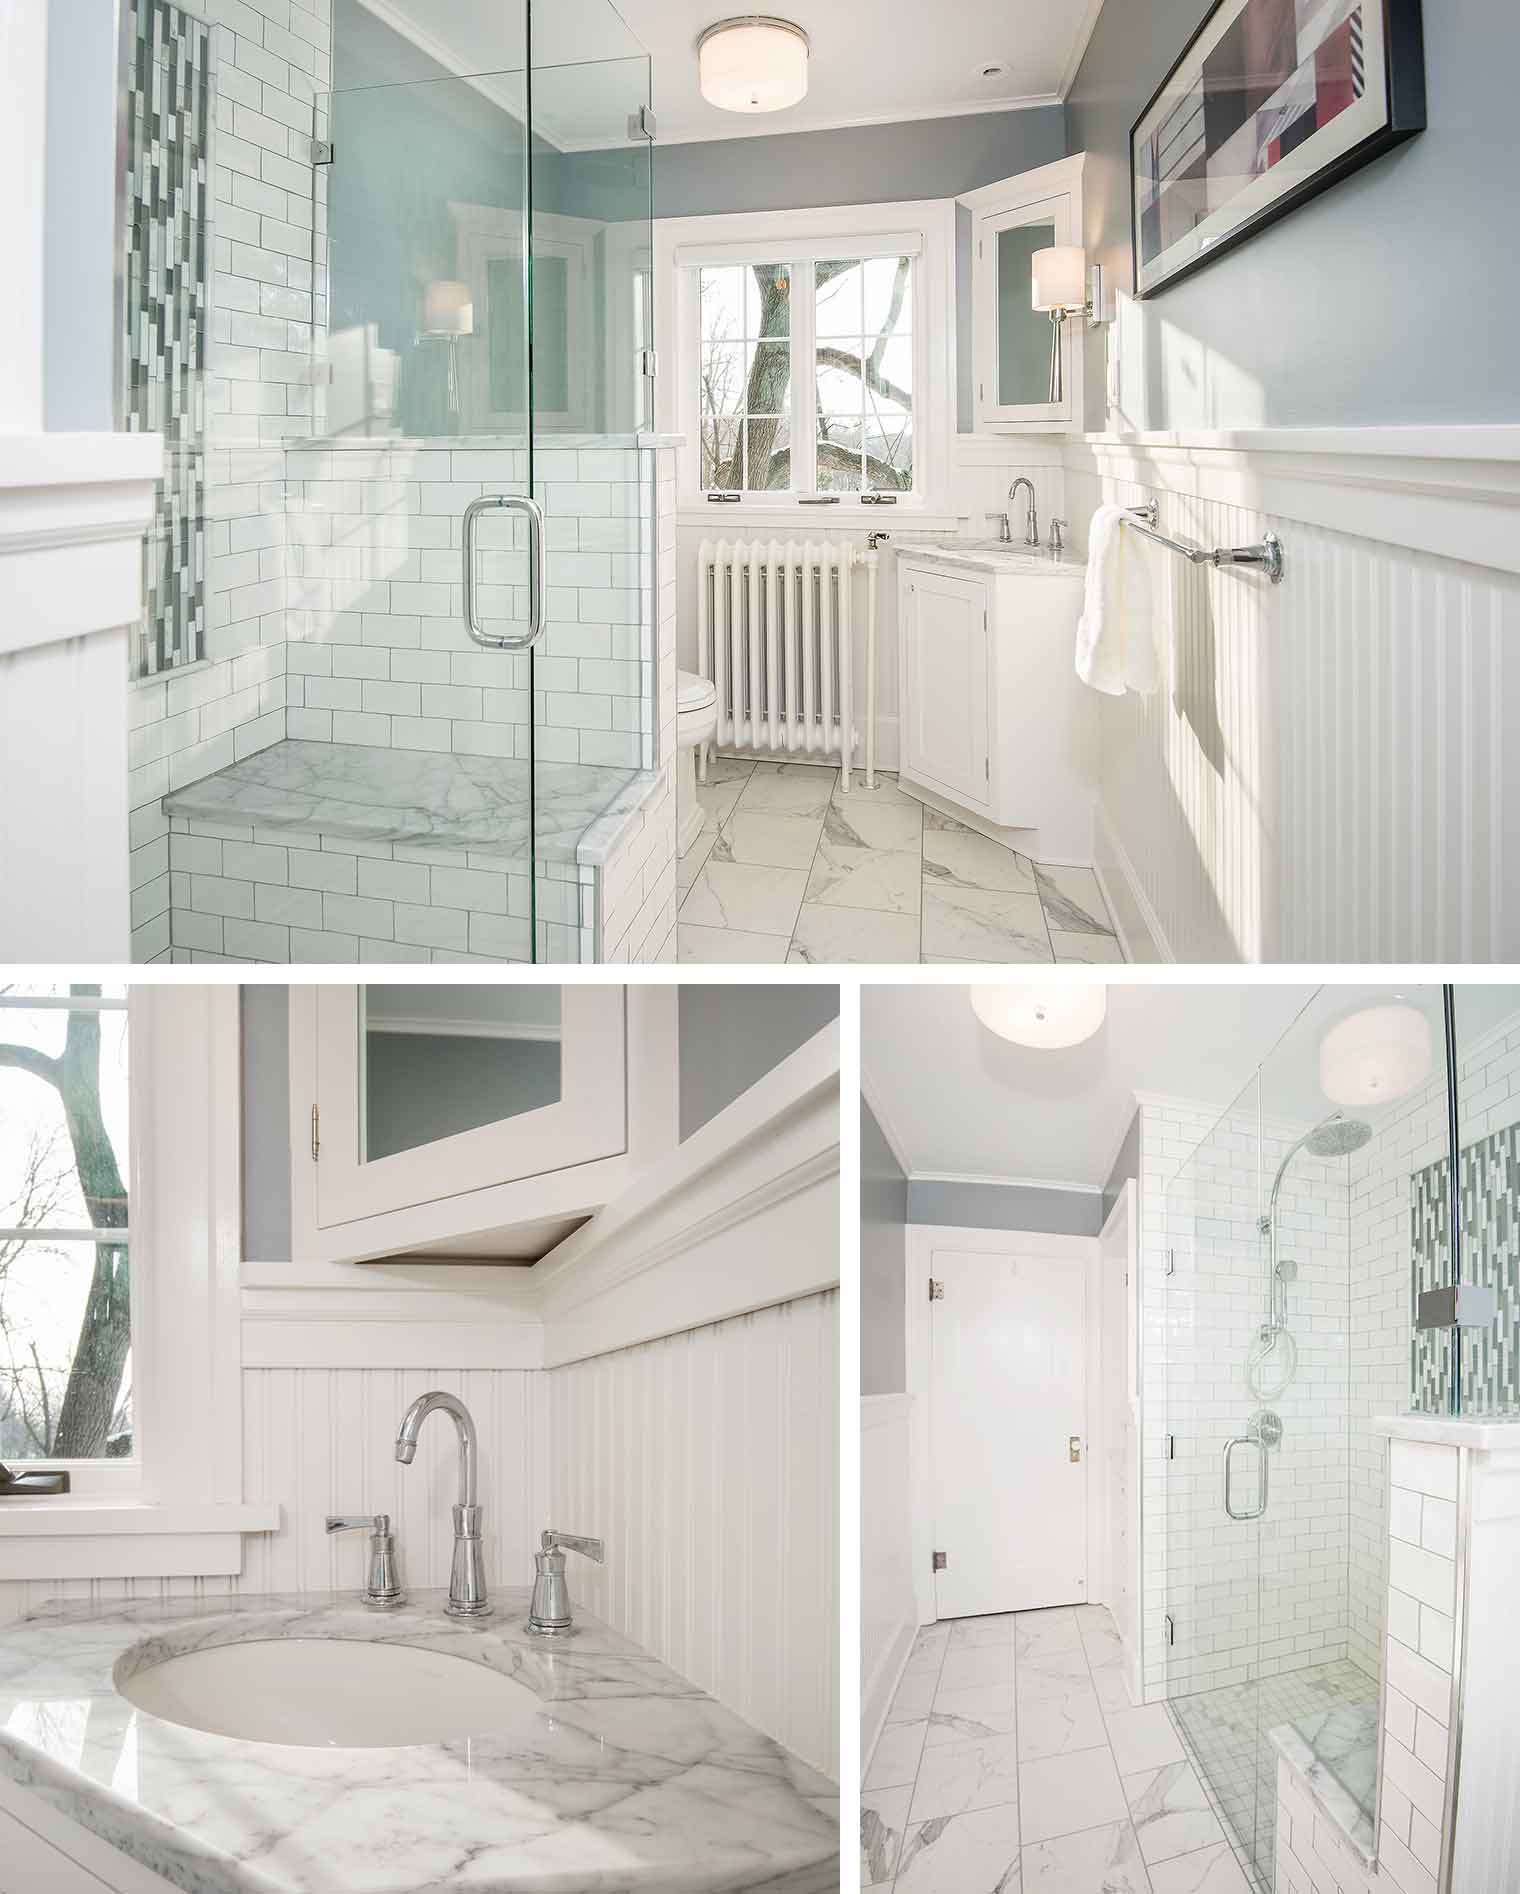 This hallway bathroom renovation allows natural light into the entire space which features a custom corner vanity and shower with glass, marble and ceramic tile designed and built by Silent Rivers of Des Moines, Iowa